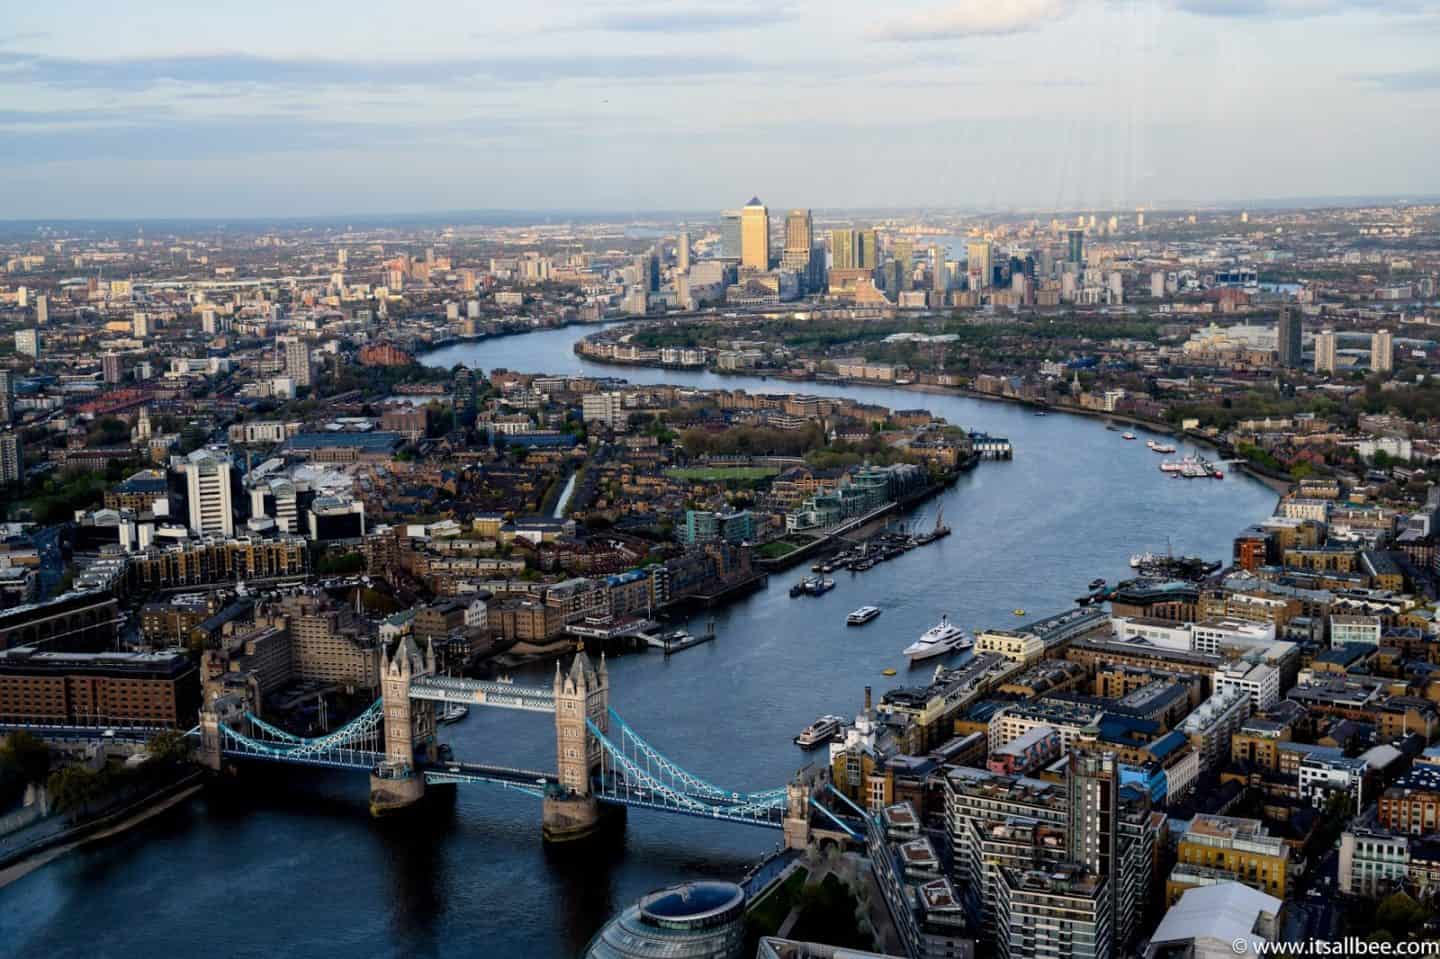 London views from the shard - best free things in london | free tourist things to do in london | sights to see in london free | free things to do in london for couples